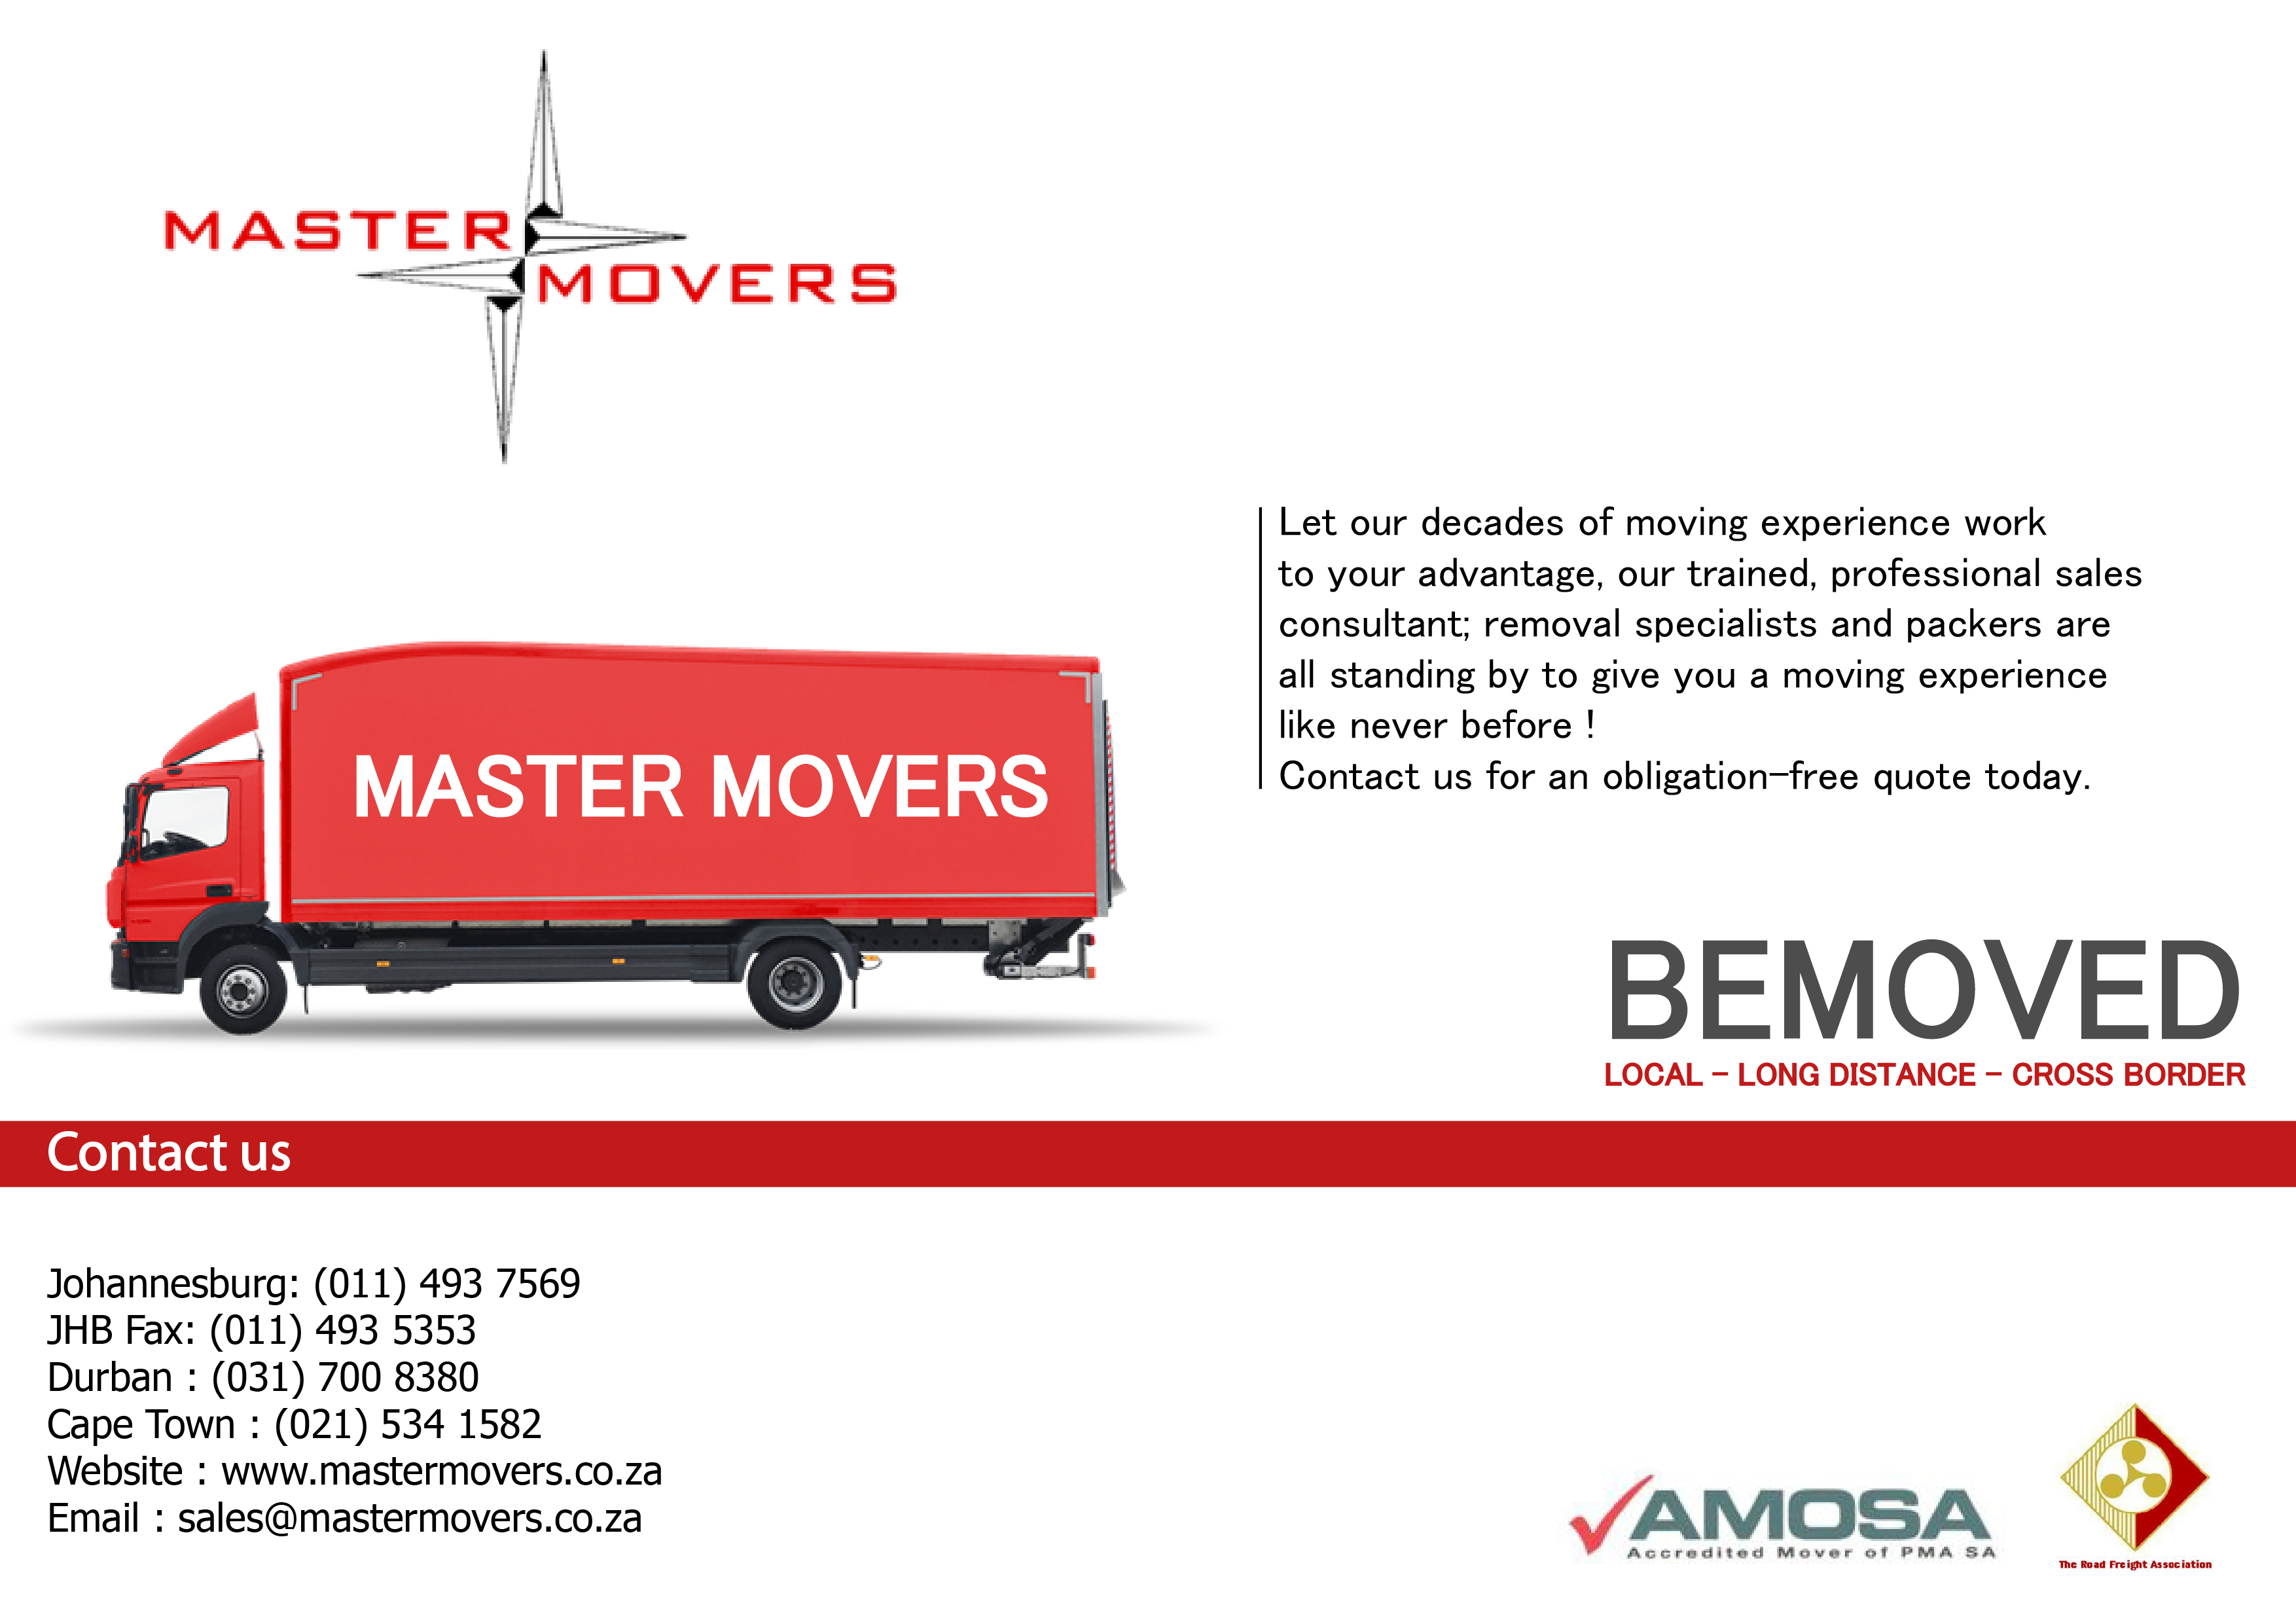 MASTER MOVERS INTER.